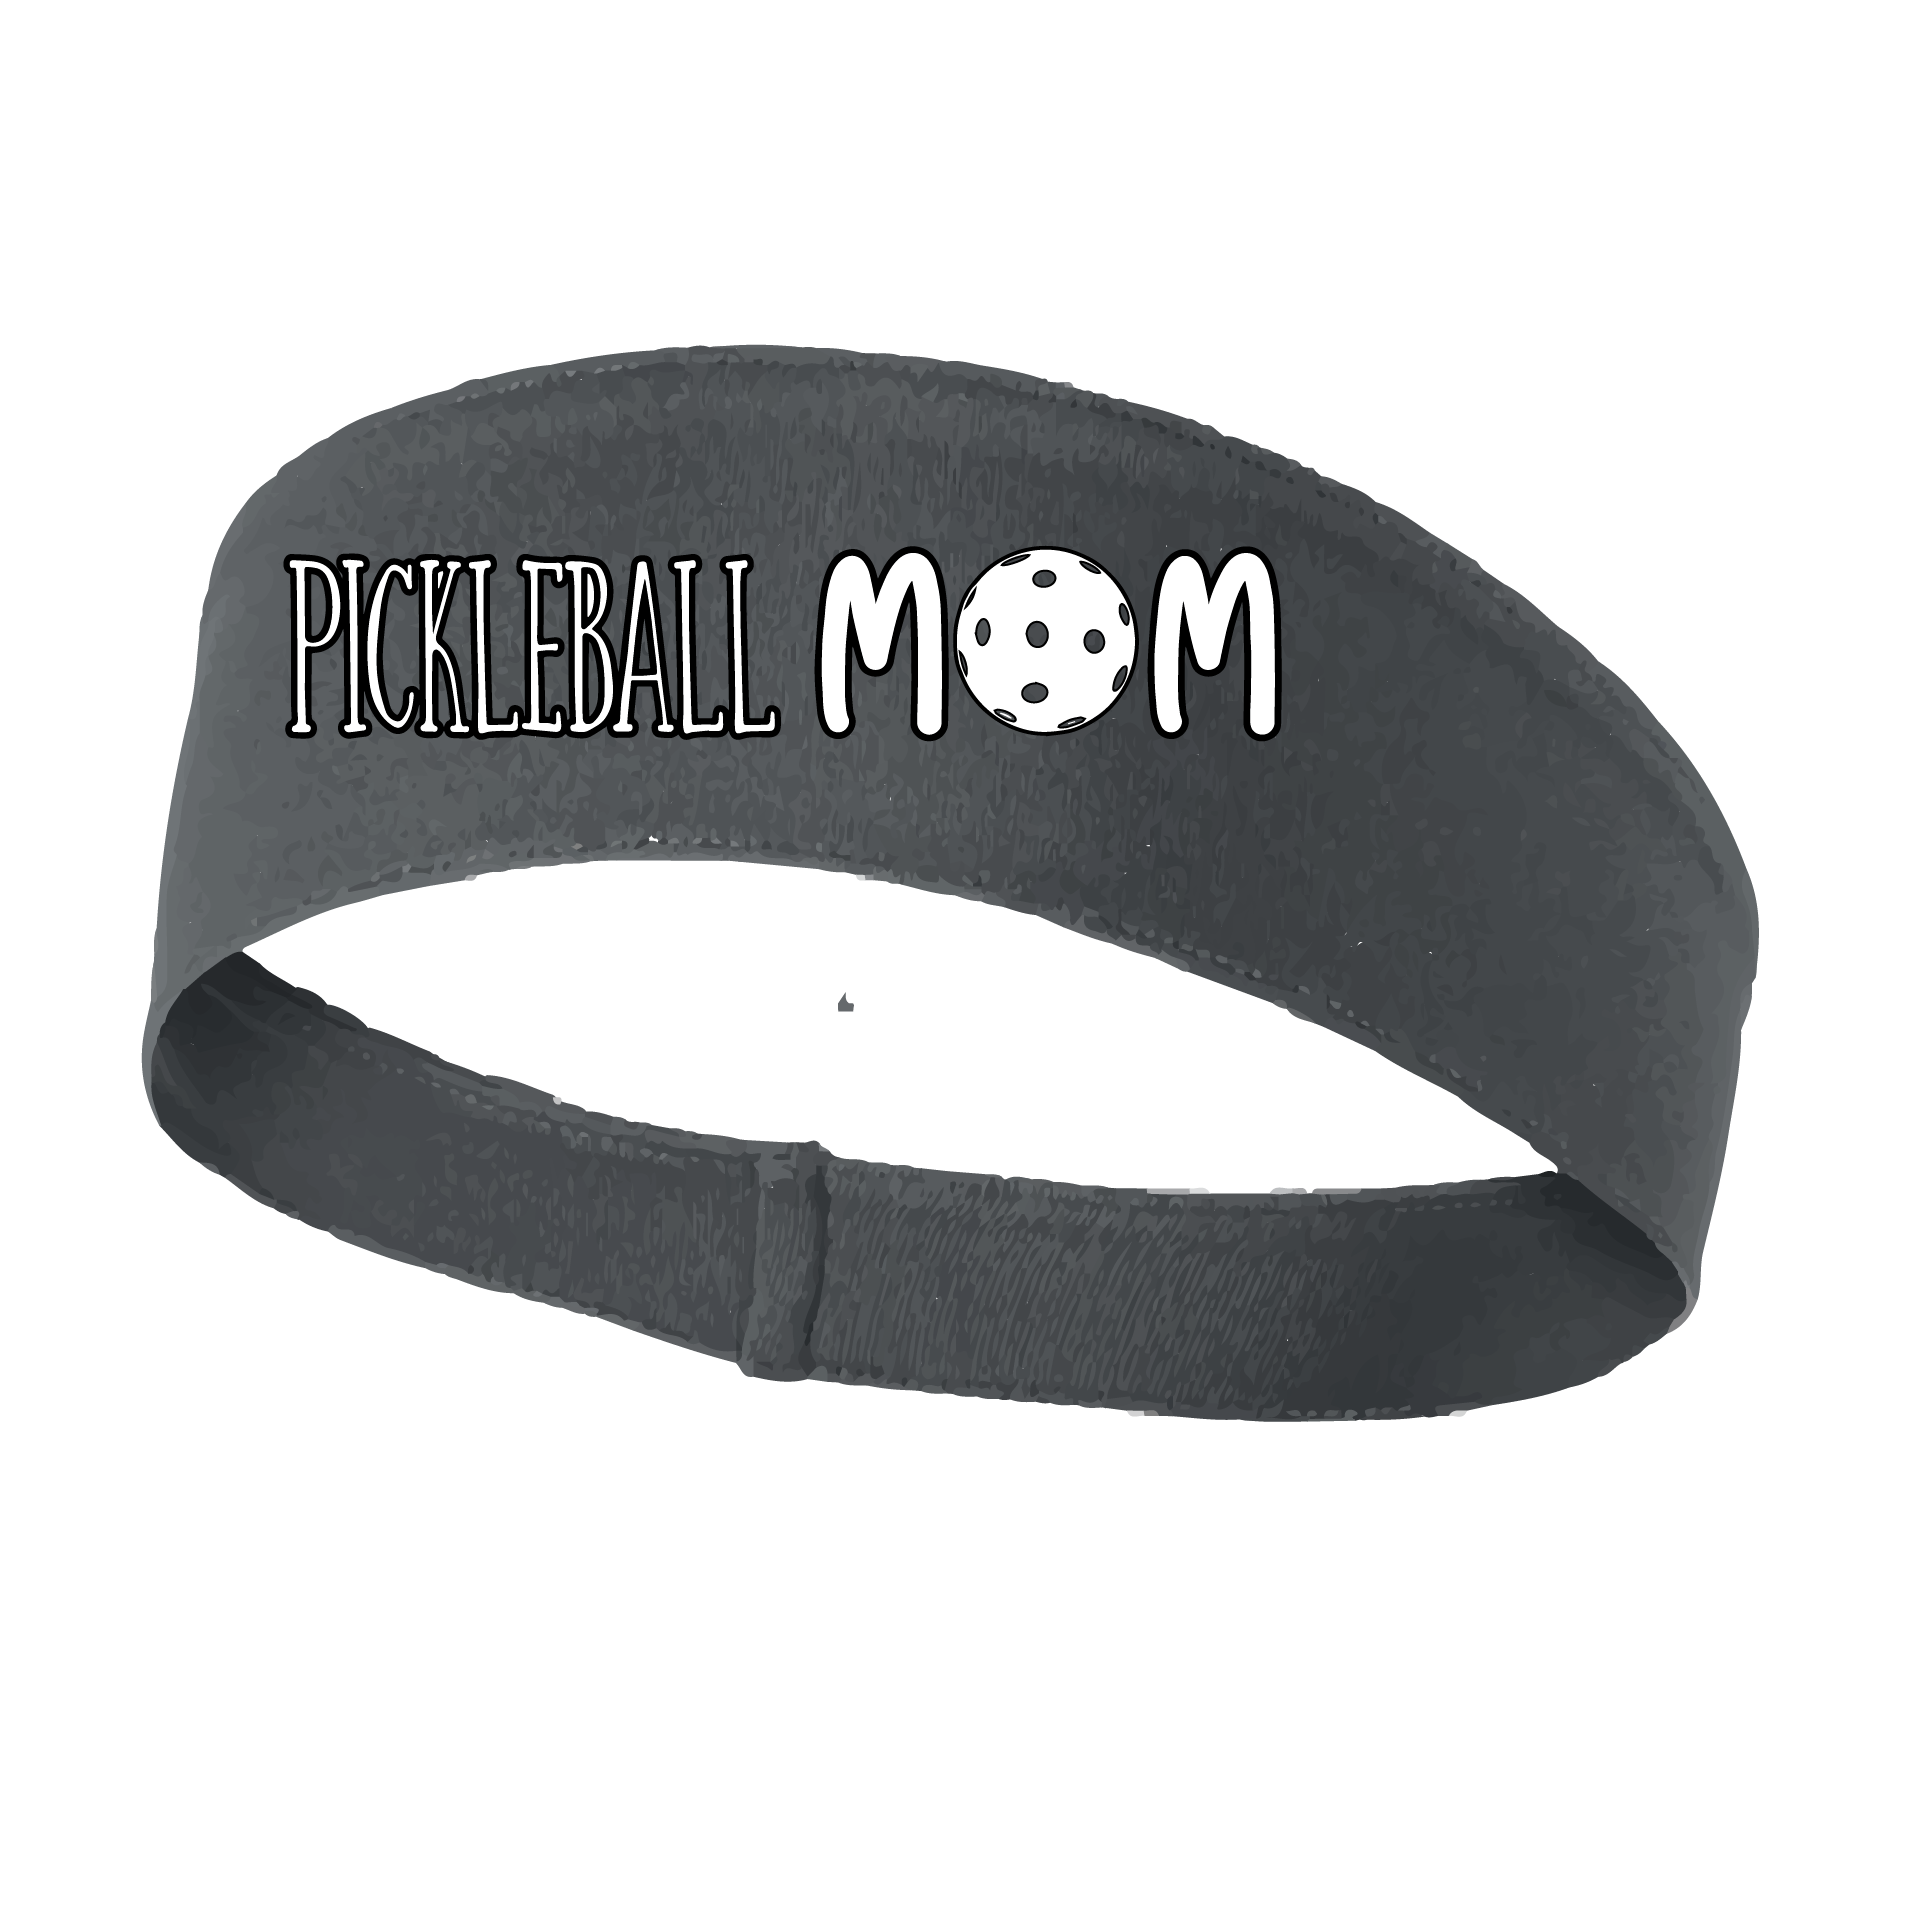 Pickleball Headband Design: Pickleball Mom  This fun, pickleball designed, moisture-wicking headband narrows in the back to fit more securely. Single-needle top-stitched edging. These headbands come in a variety of colors. Truly shows your love for the sport of pickleball!!